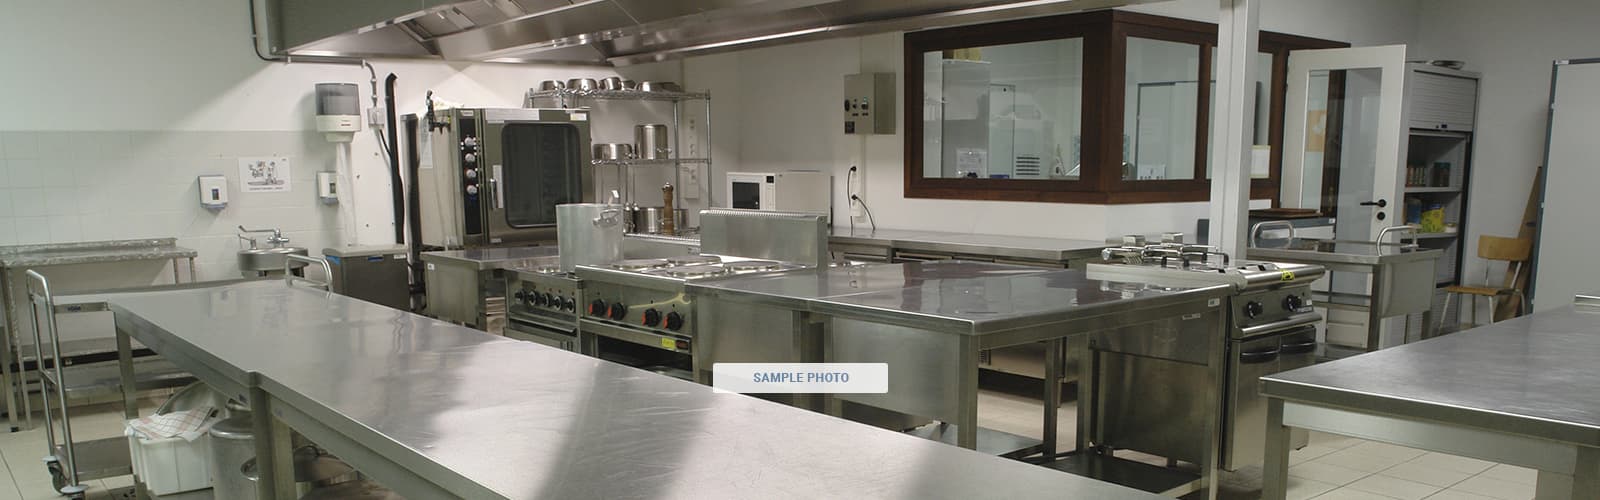 George W. Carver Early Education Center Kitchen in Lockhart Texas